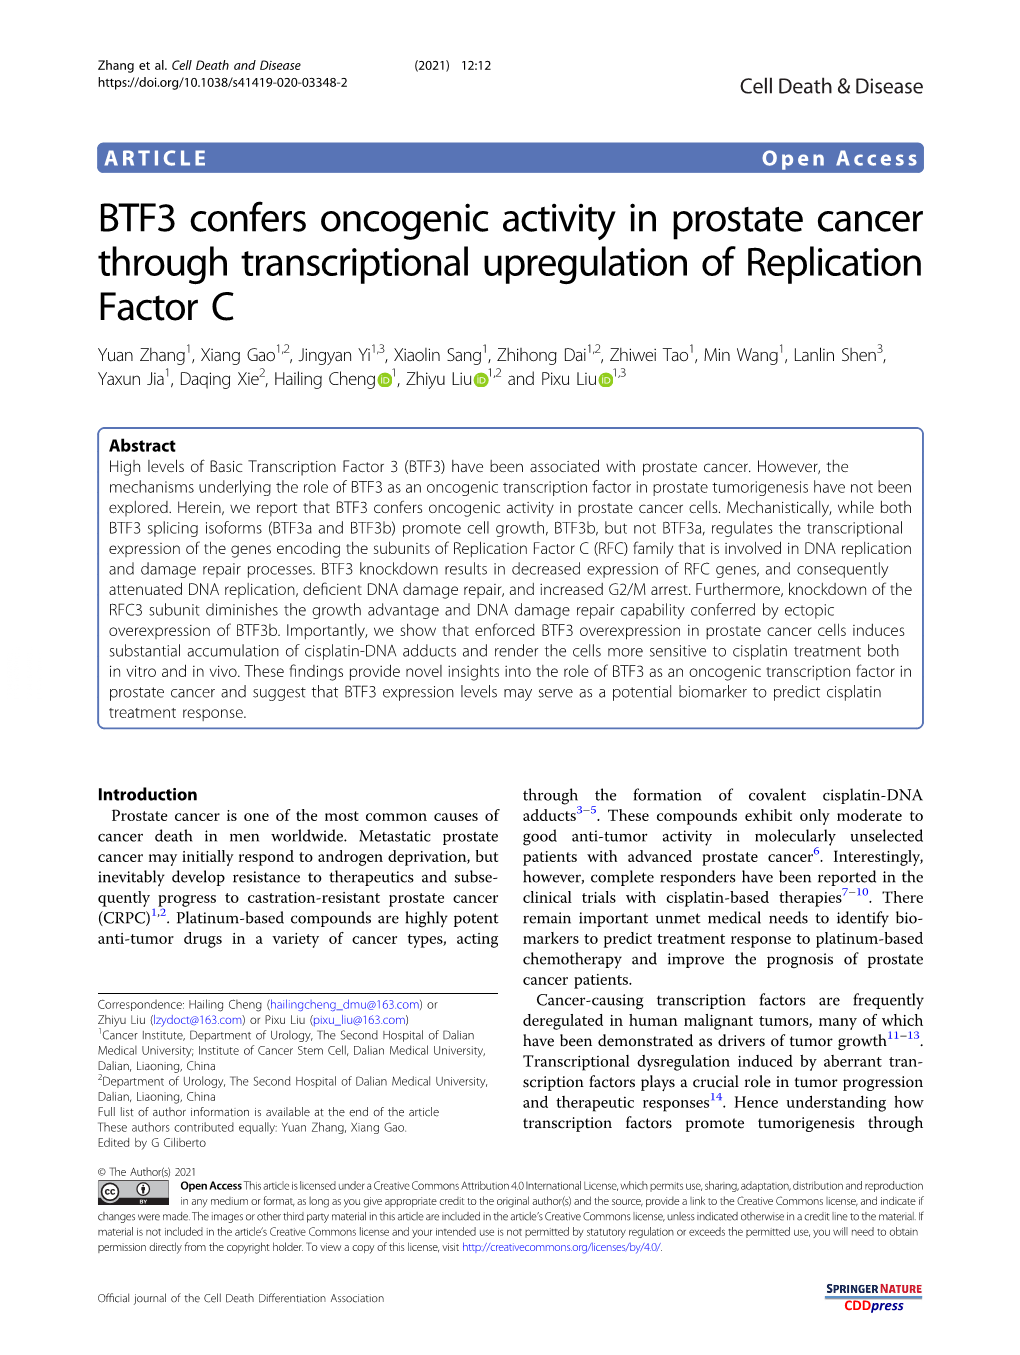 BTF3 Confers Oncogenic Activity in Prostate Cancer Through